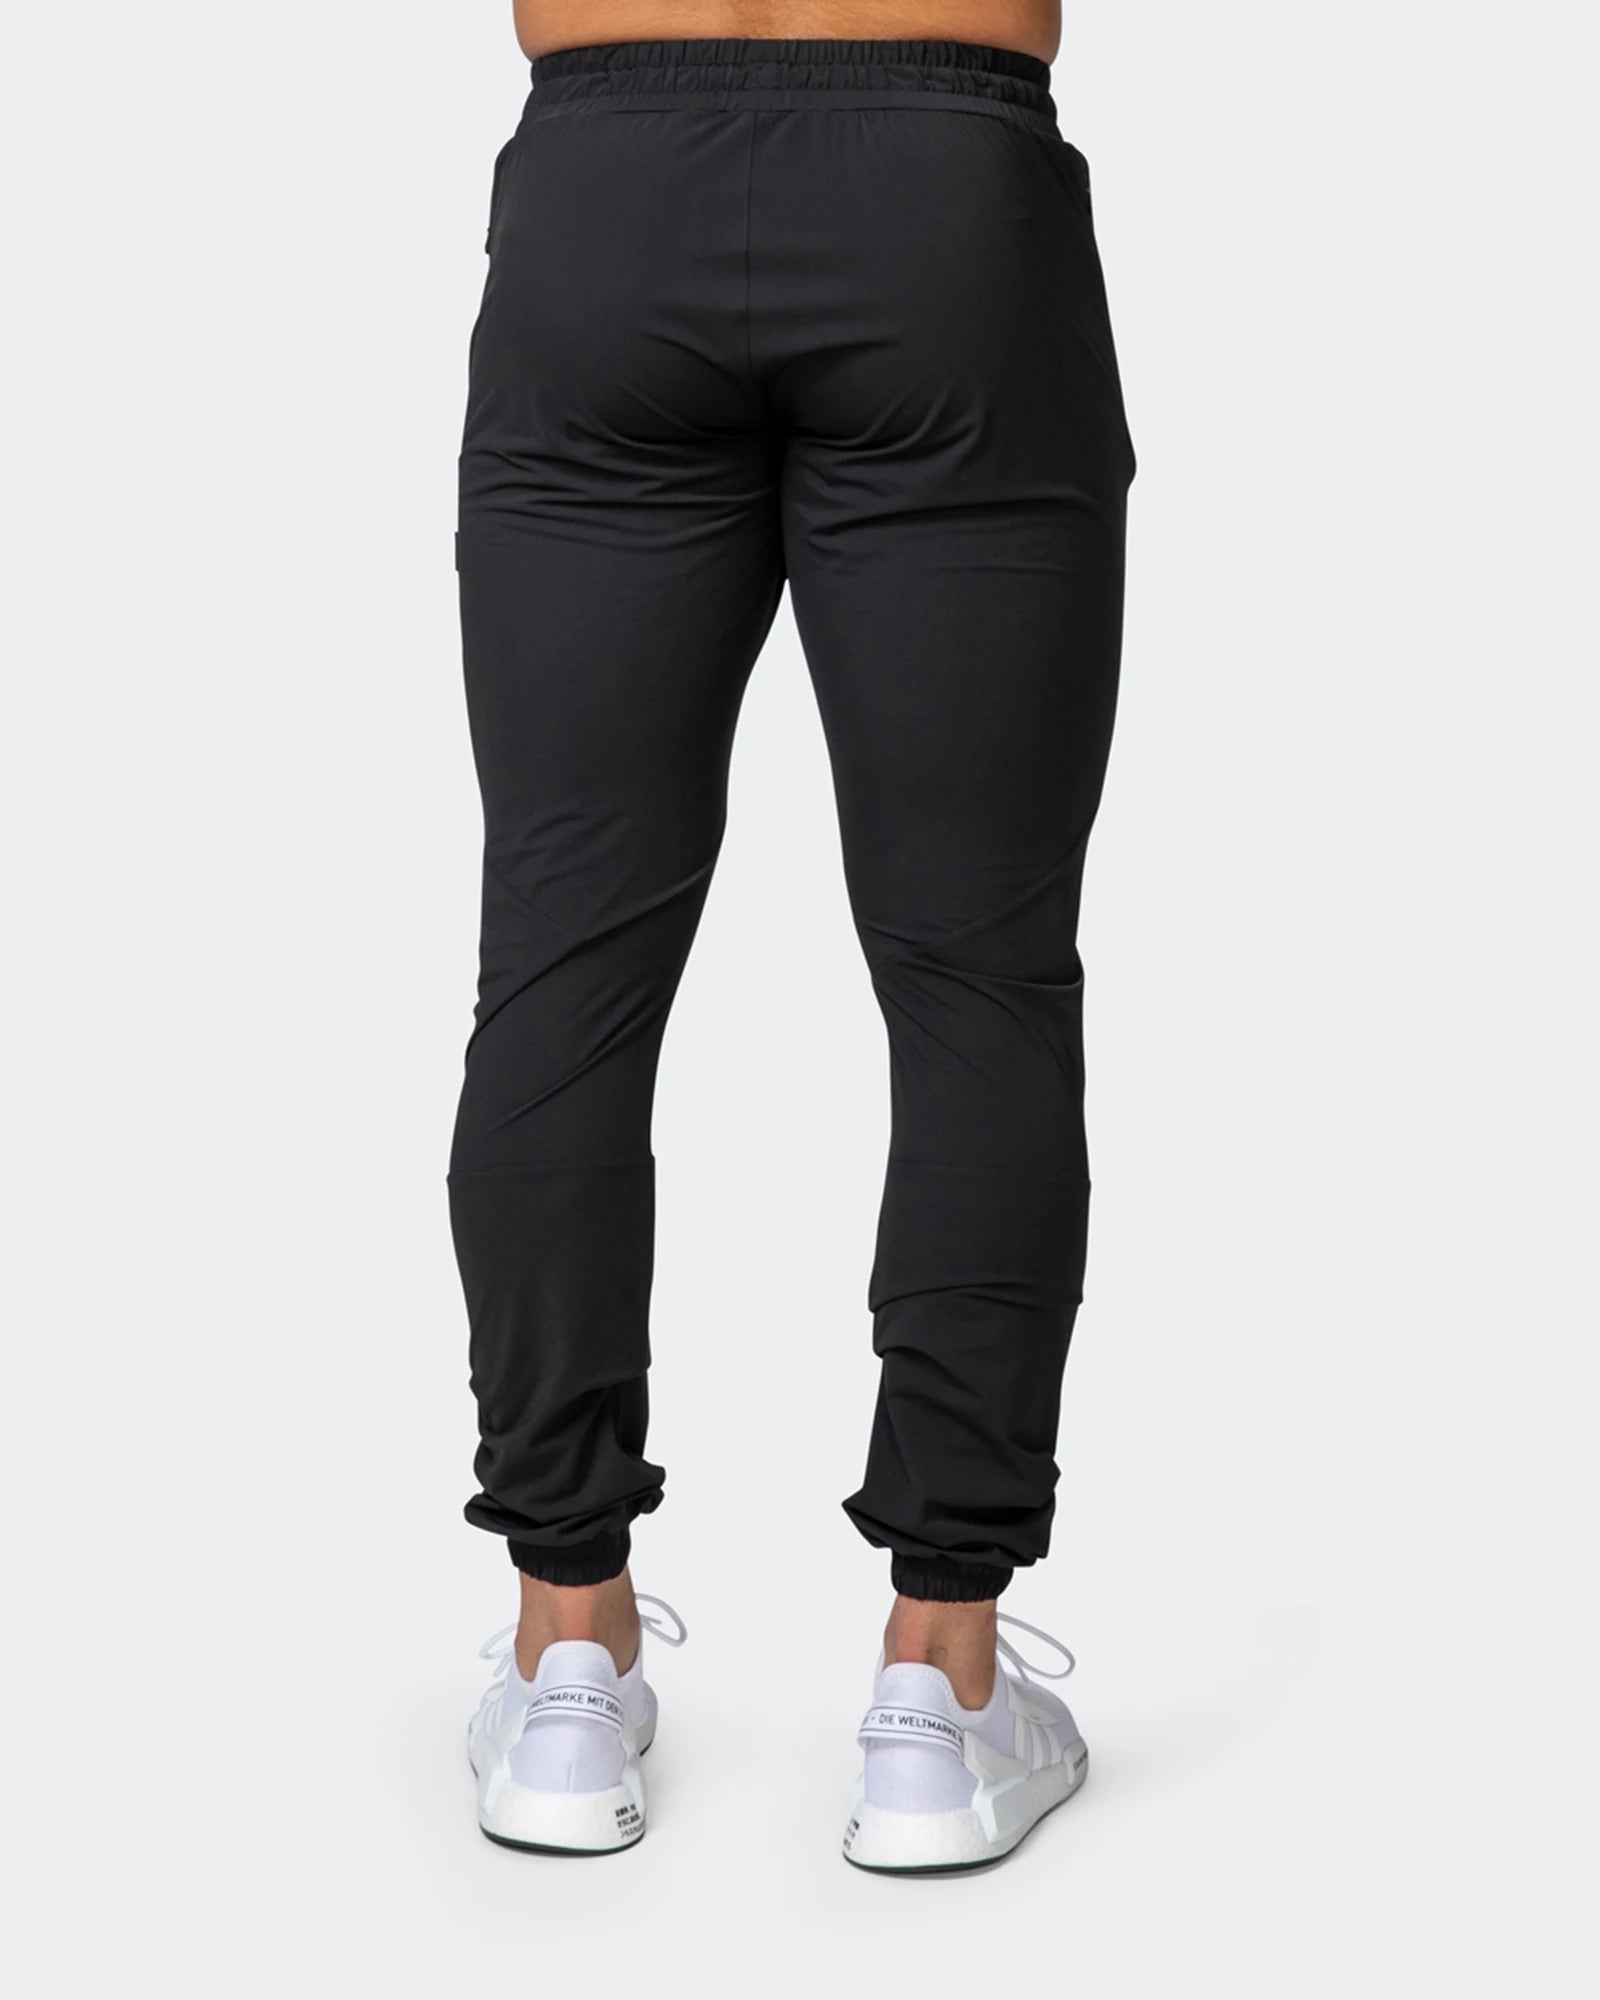 musclenation joggers MENS DYNAMIC LIGHTWEIGHT TAPERED JOGGERS Black